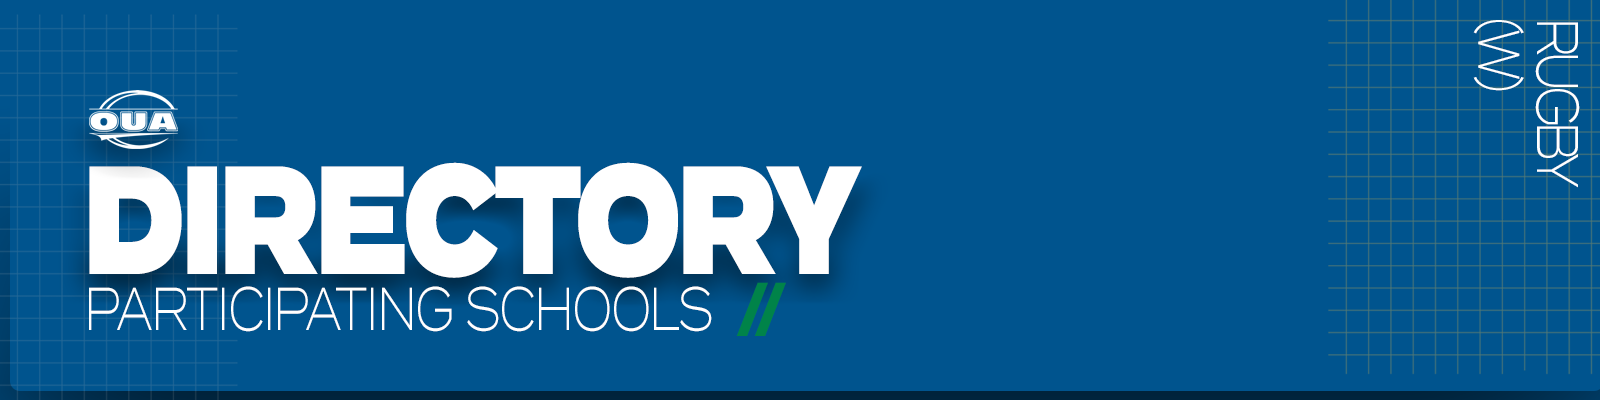 Predominantly blue graphic with large white text on the left side that reads 'Directory, Participating Schools' and small white vertical text on the right side that reads 'Rugby W'